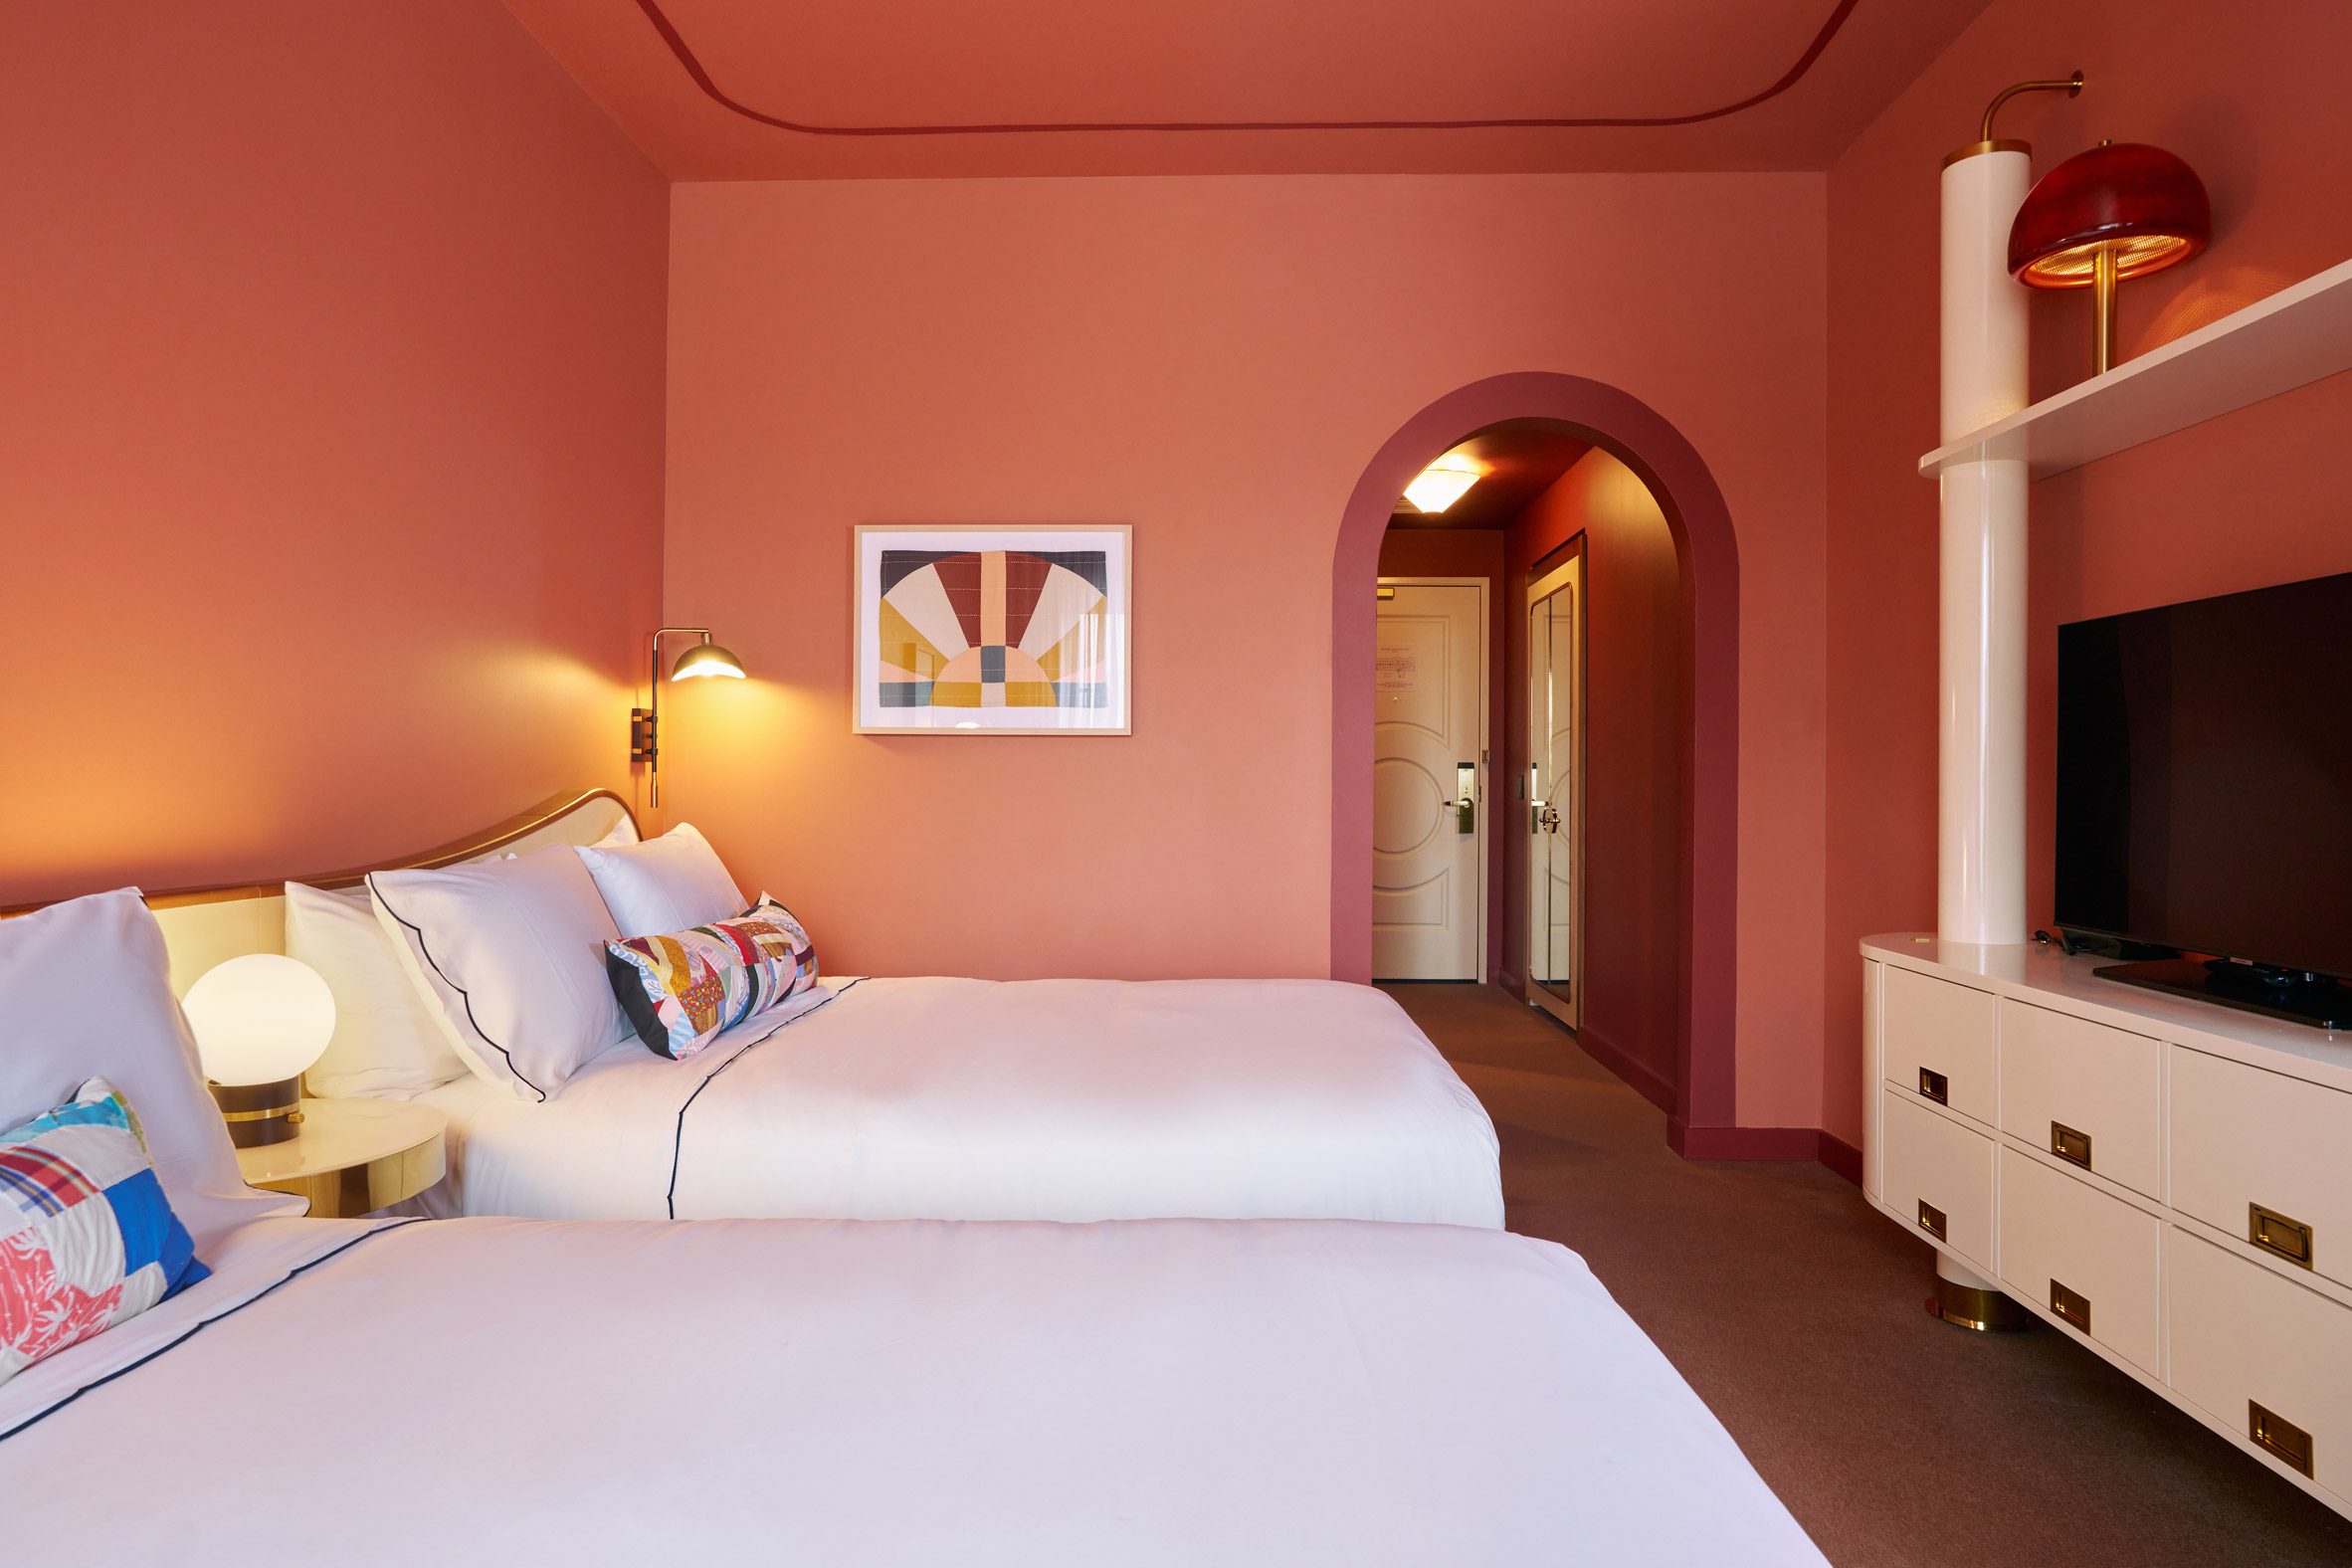 Terracotta-coloured hotel room with two queen beds